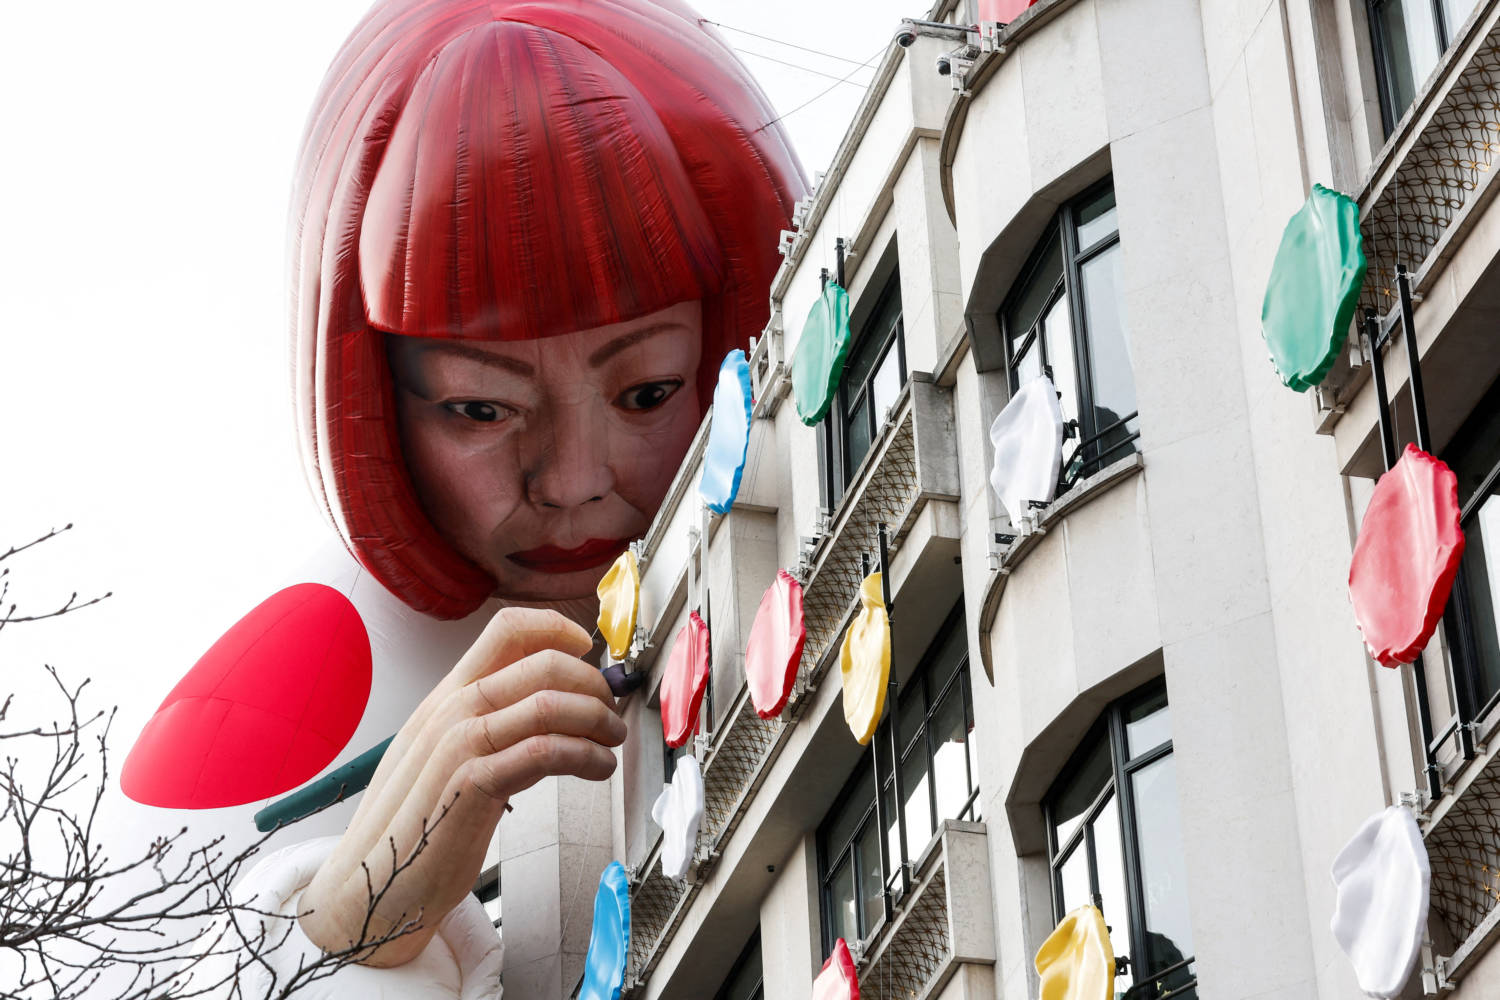 Installation Of Yayoi Kusama's Mannequin Covers The Exterior Of The Louis Vuitton's Flagship Store In Paris